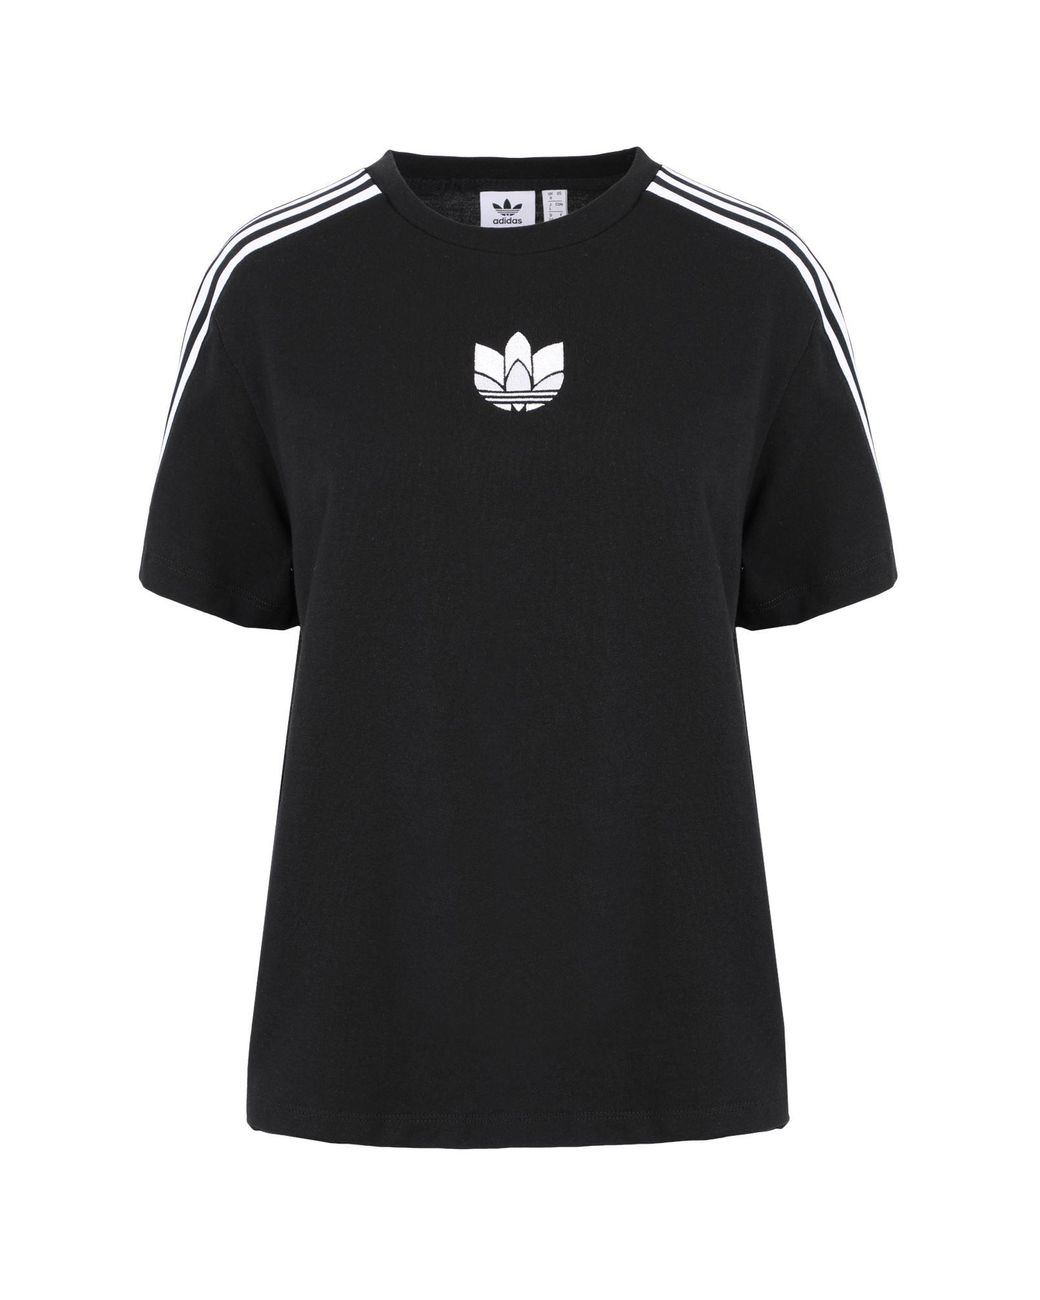 adidas Originals Synthetic T-shirt in Black - Lyst